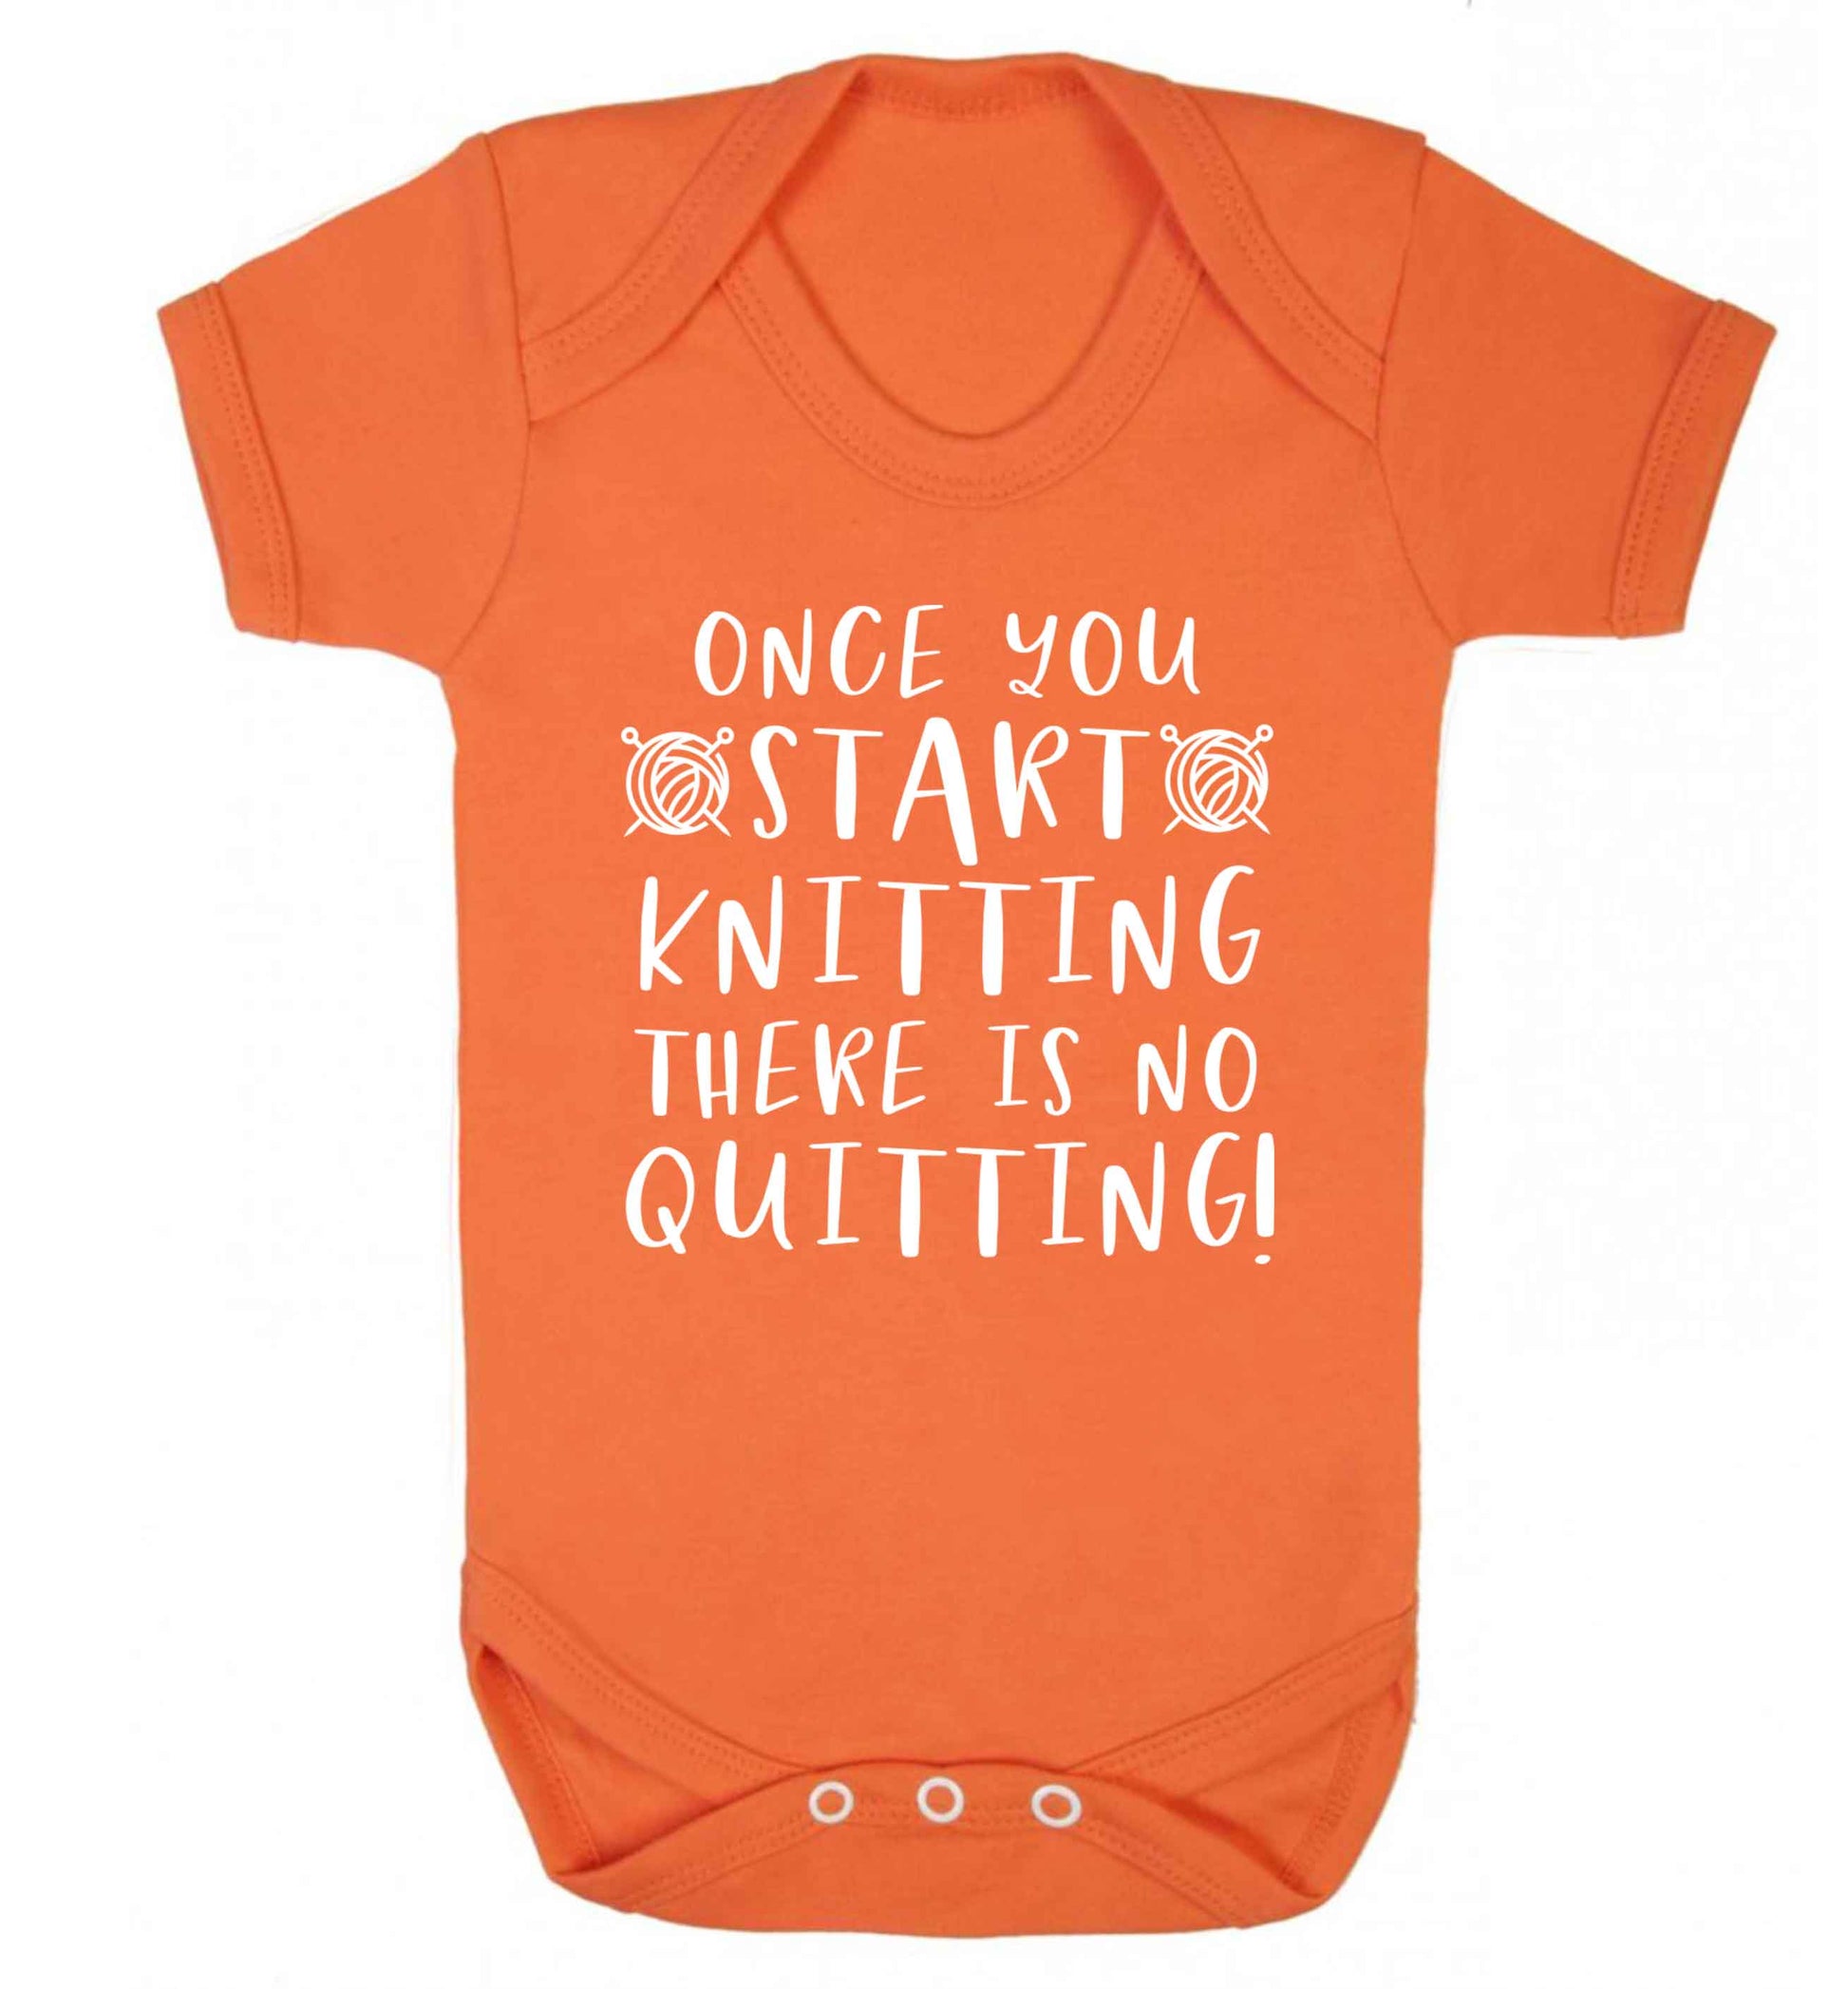 Once you start knitting there is no quitting! Baby Vest orange 18-24 months